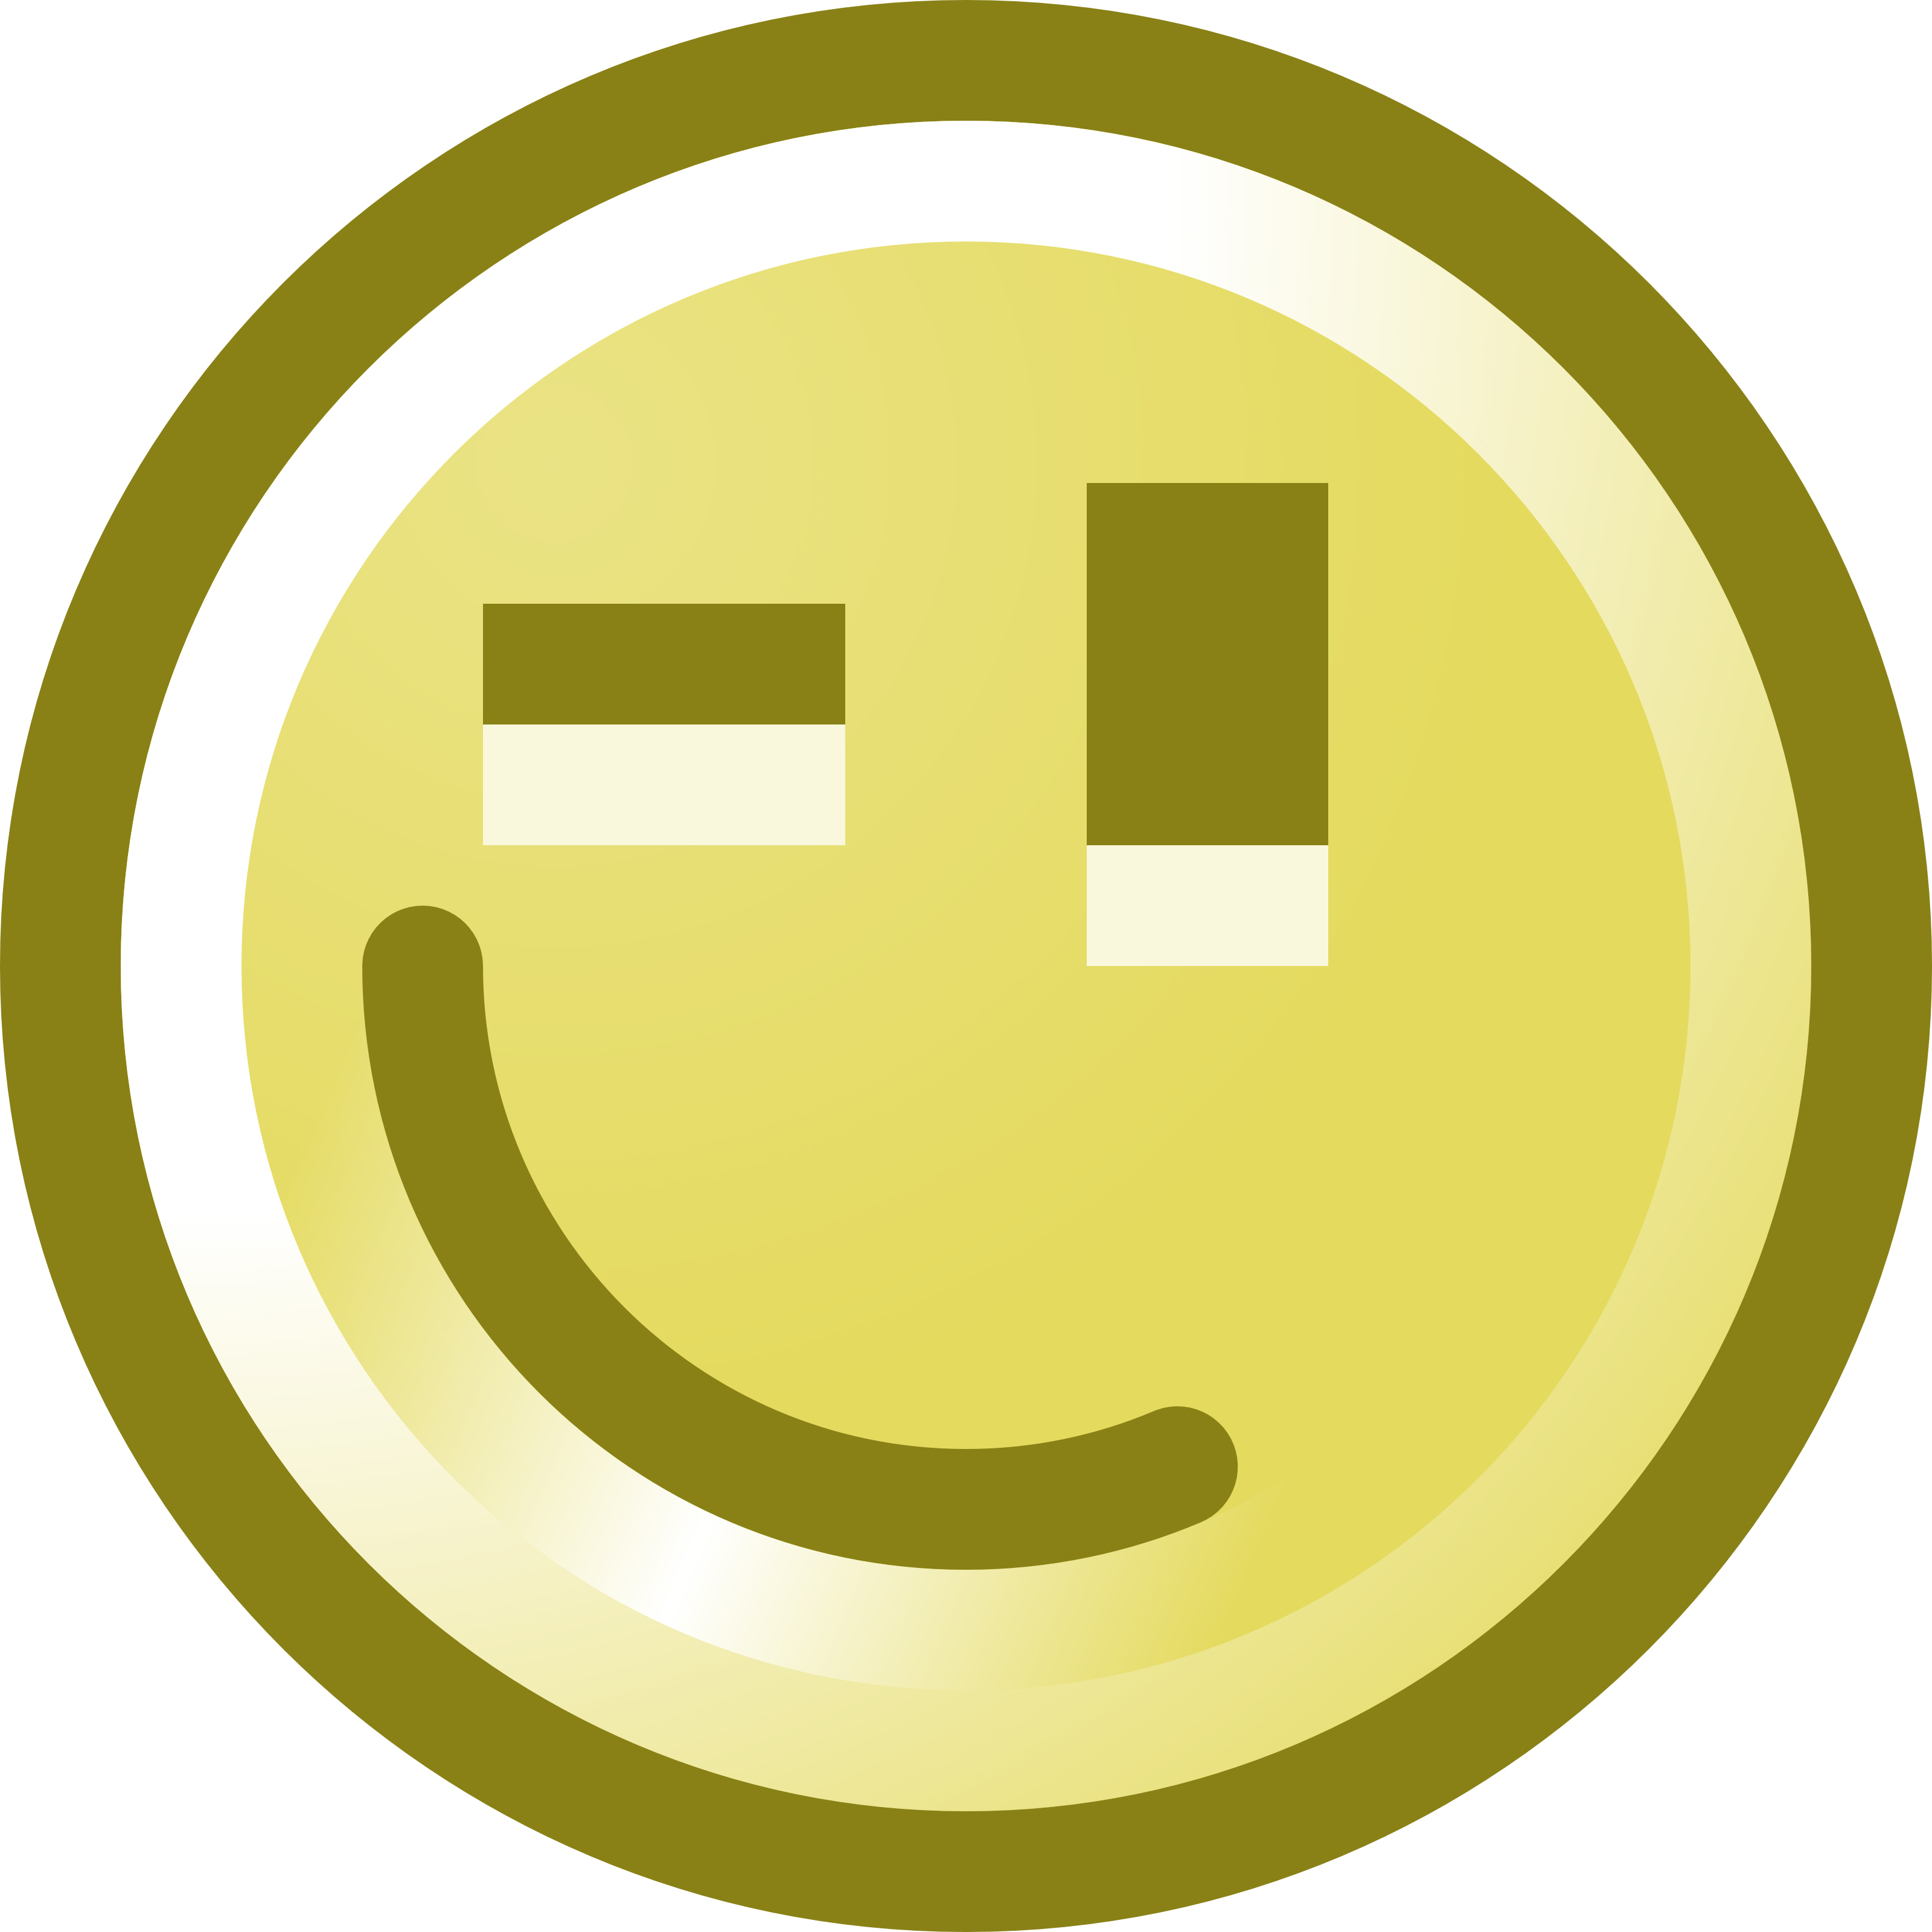 Wink smiley face with mustache and thumbs up free clip art image